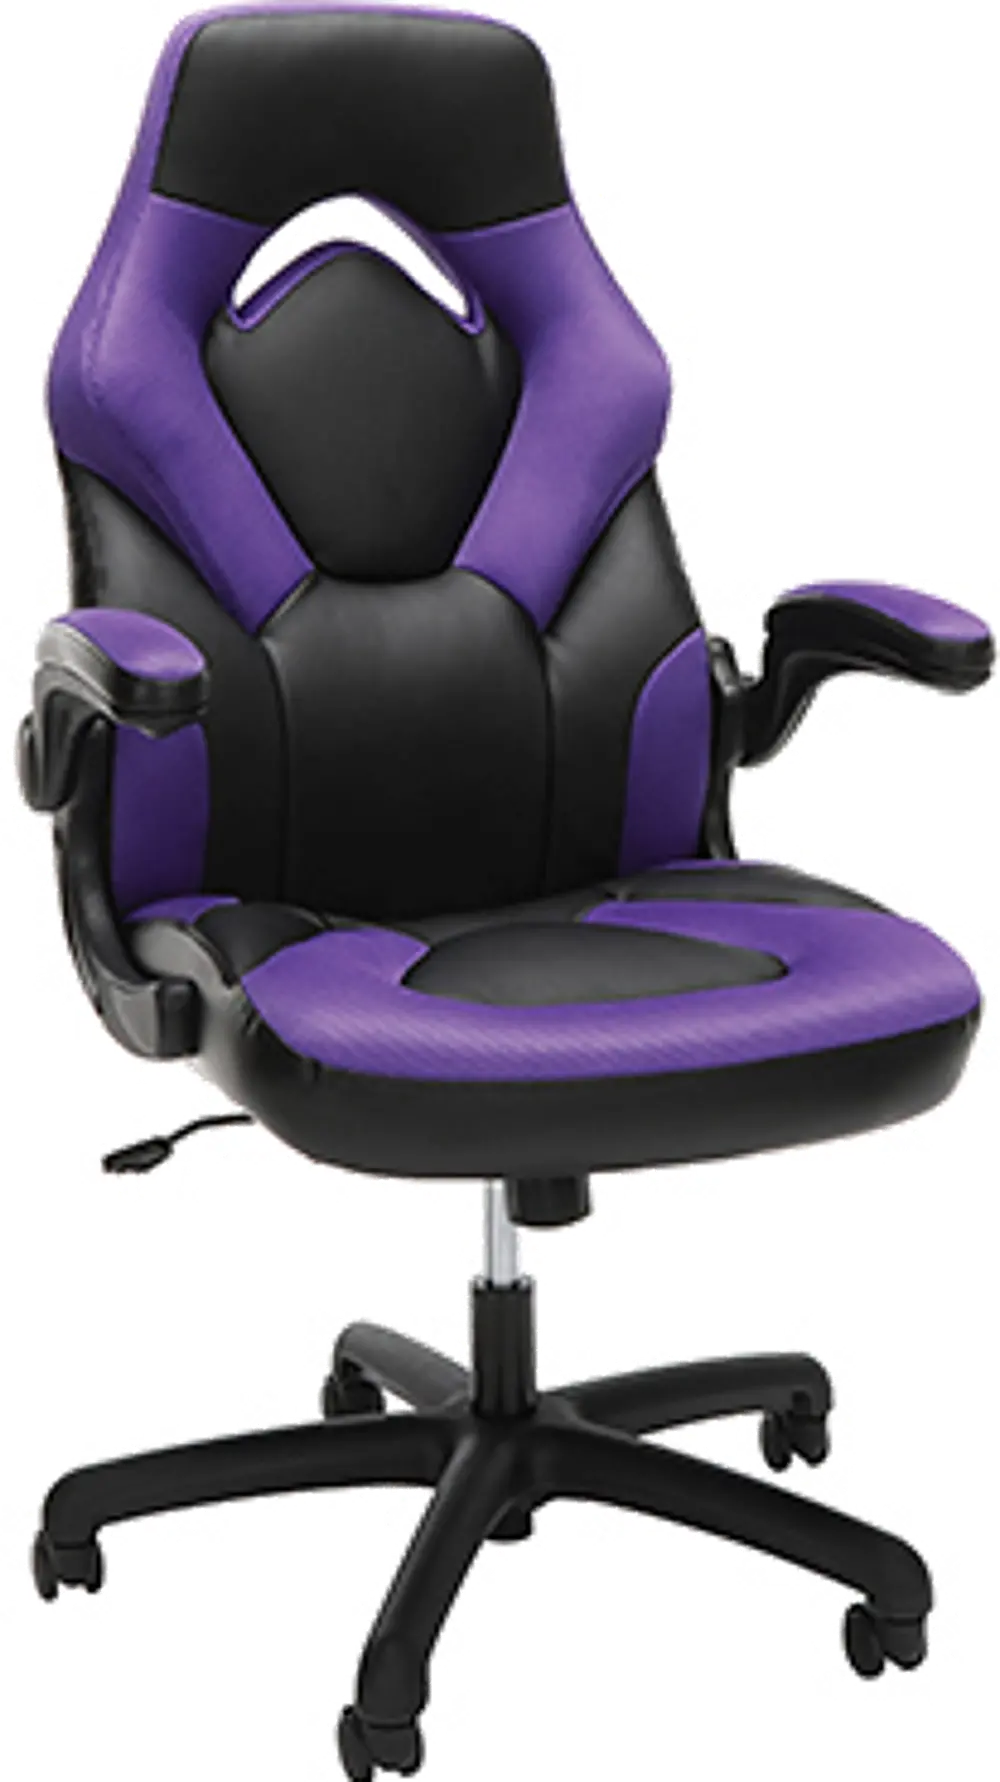 Purple and Black Racing Style Leather Gaming Chair - Essentials-1